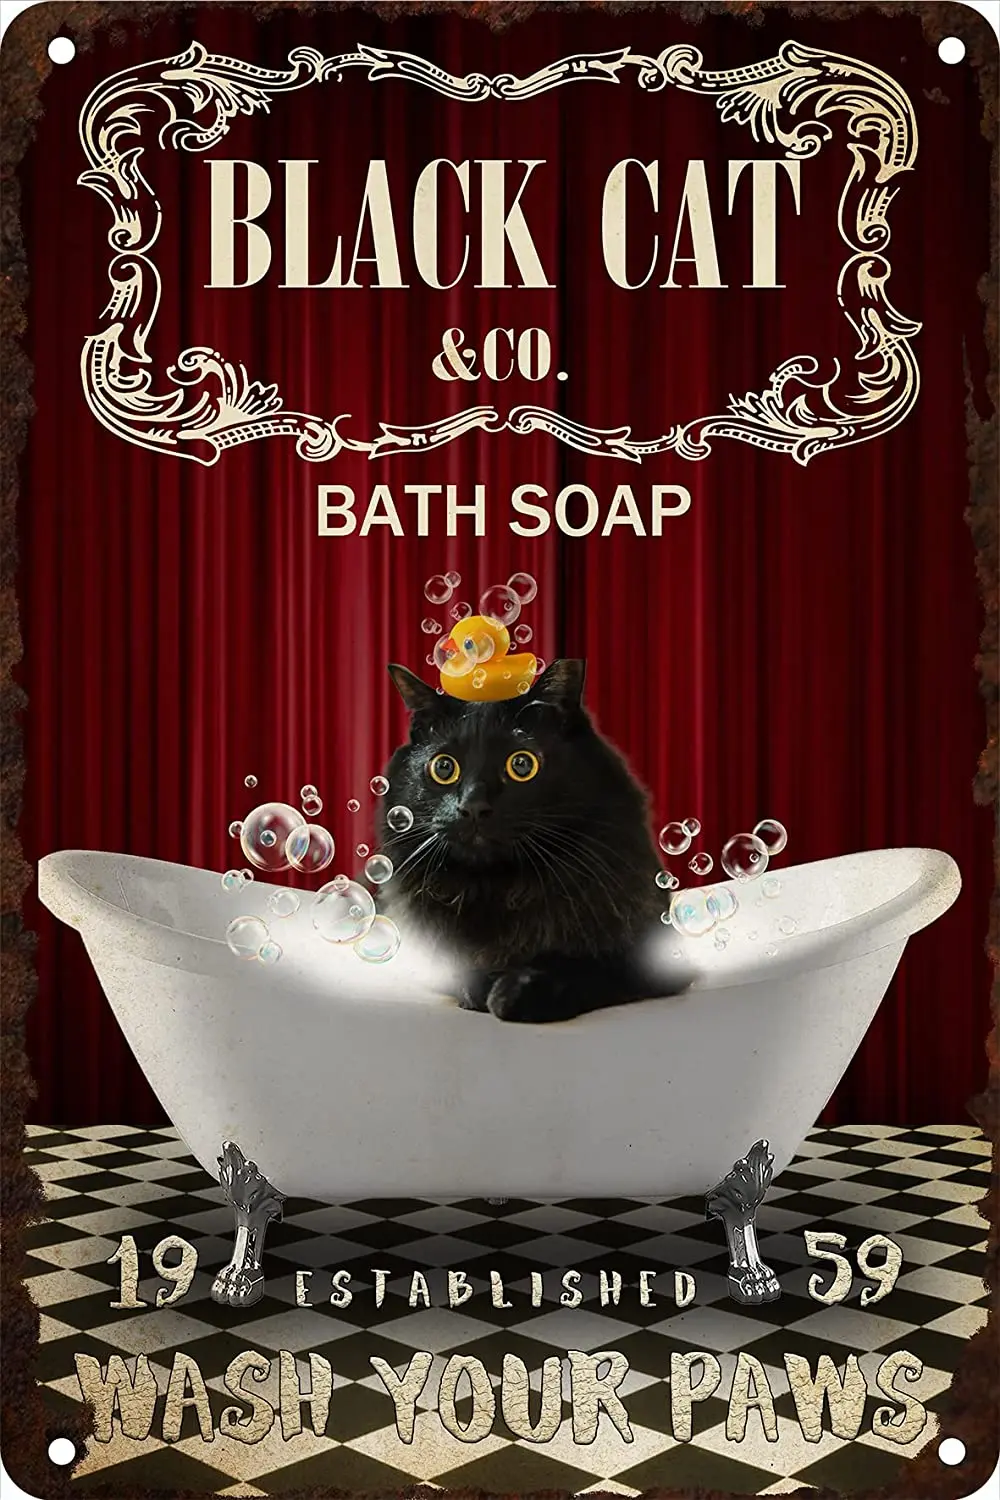 

Black Cat Bath Soap Metal Tin Sign Wash Your Paws Bathroom Signs Home Wall Decor For Cafe Bar Club